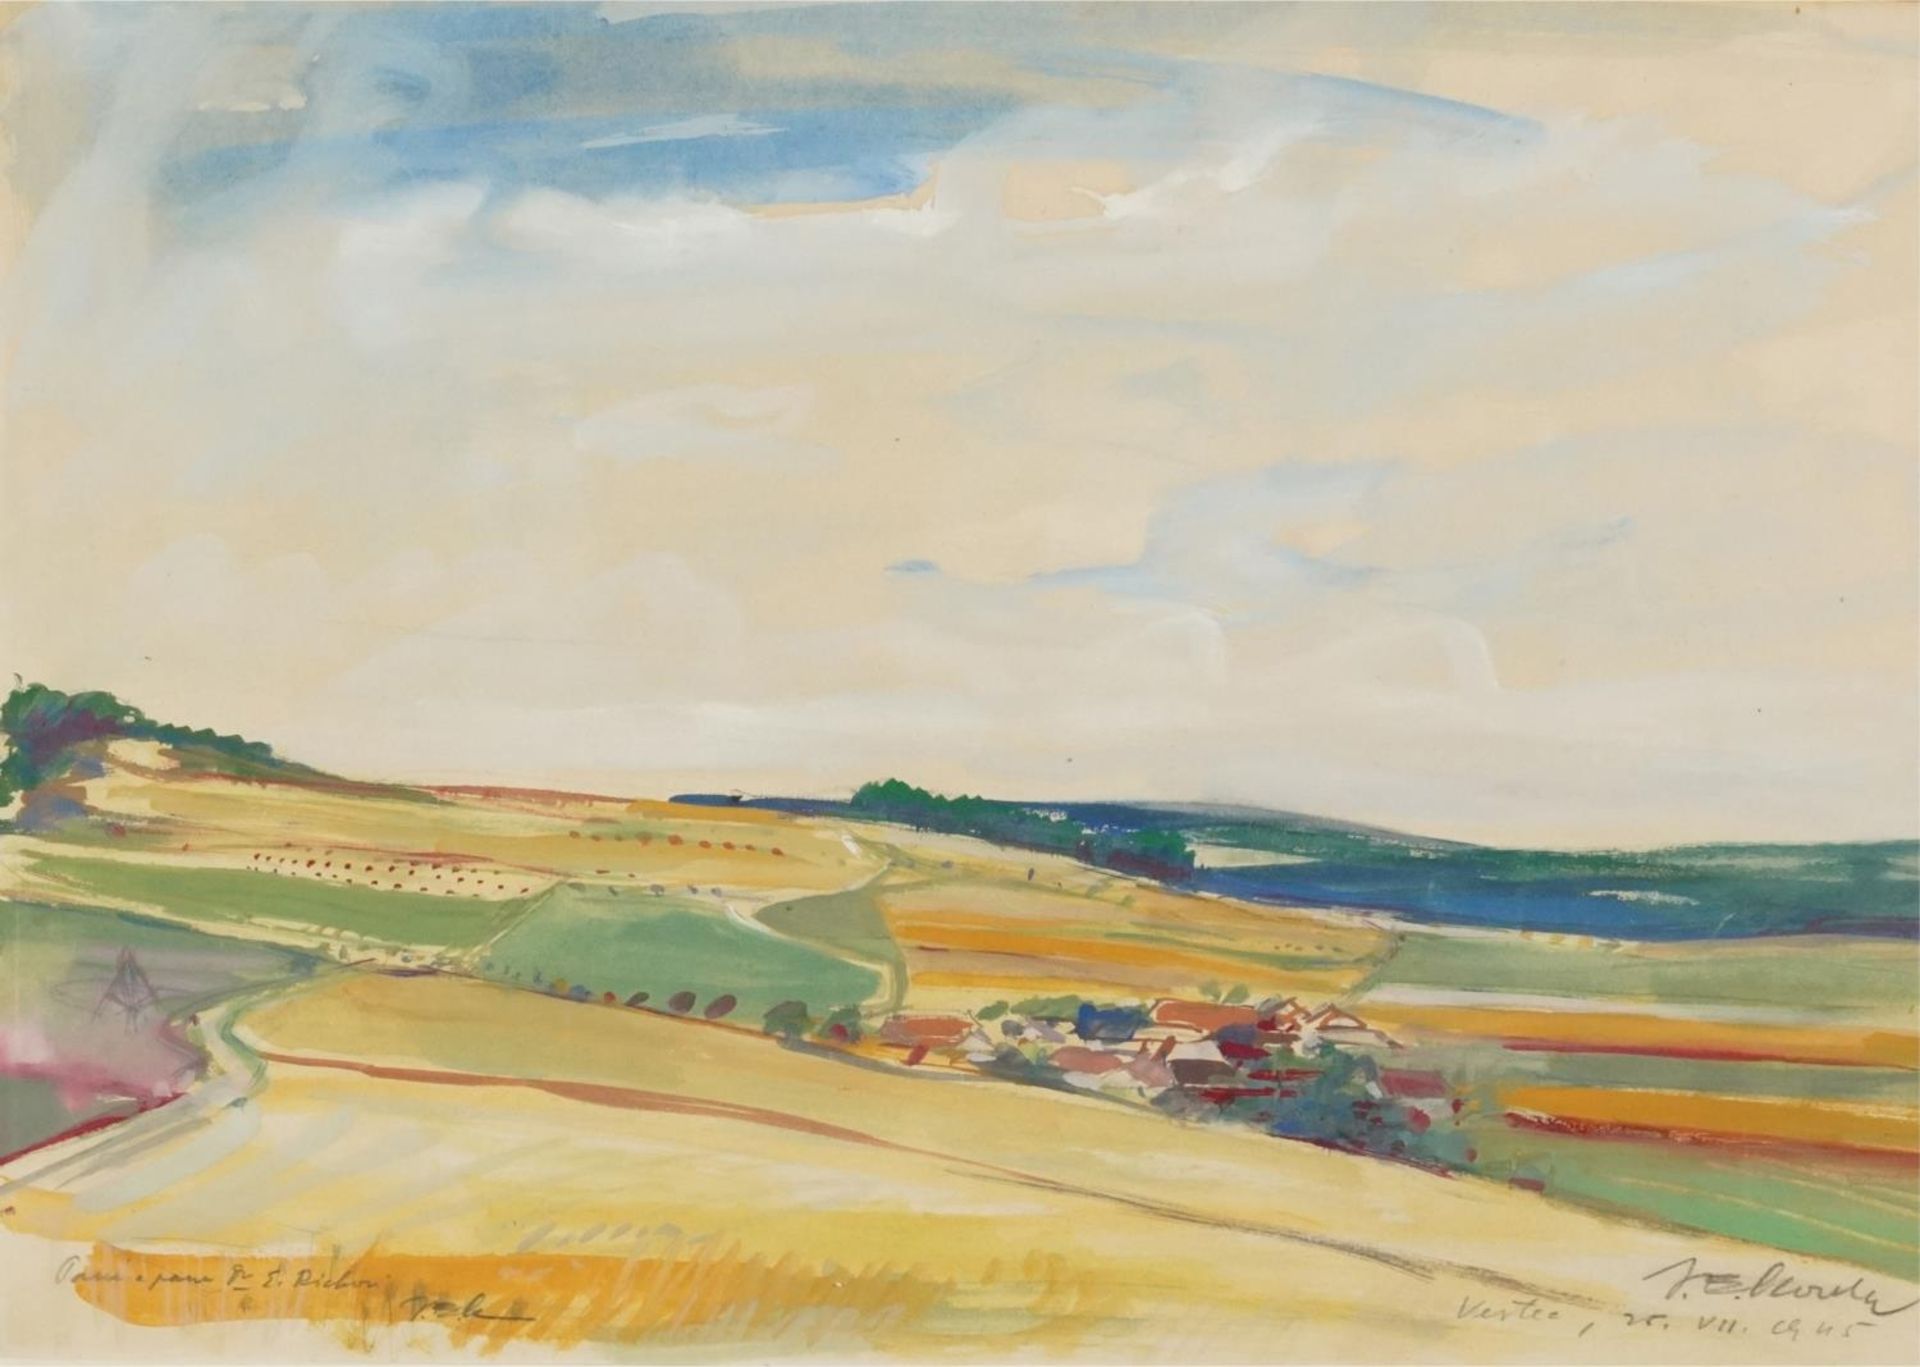 Panoramic rural landscape, watercolour, indistinctly signed and inscribed, mounted, framed and